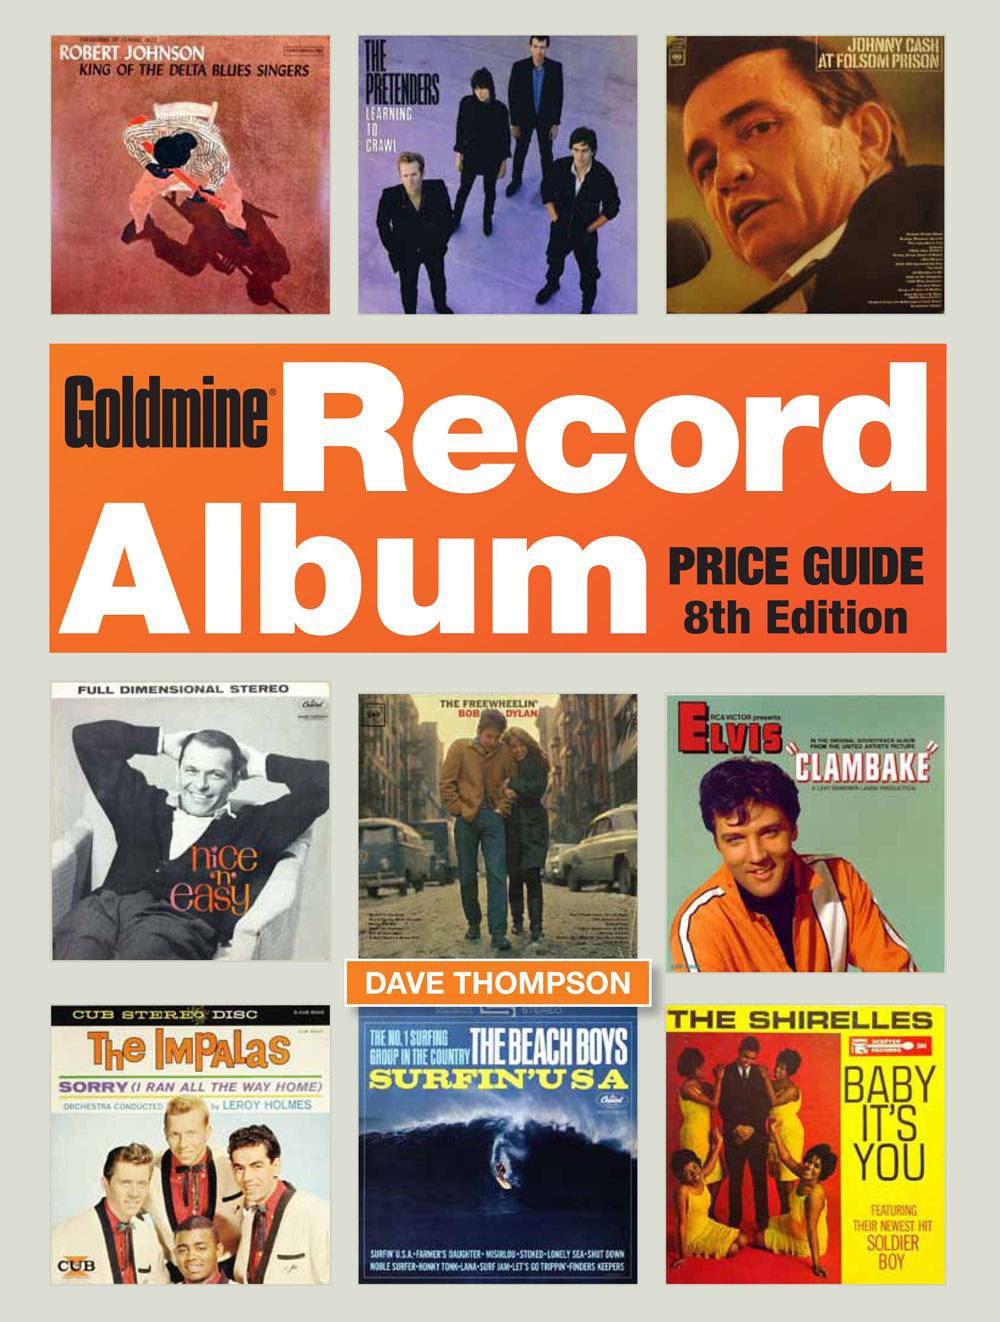 Get 15% off GOLDMINE S LATEST RECORD ALBUM PRICE GUIDE What makes GOLDMINE RECORD ALBUM PRICE GUIDE one of the best companions a collector can have is the depth of details and breadth of reliable